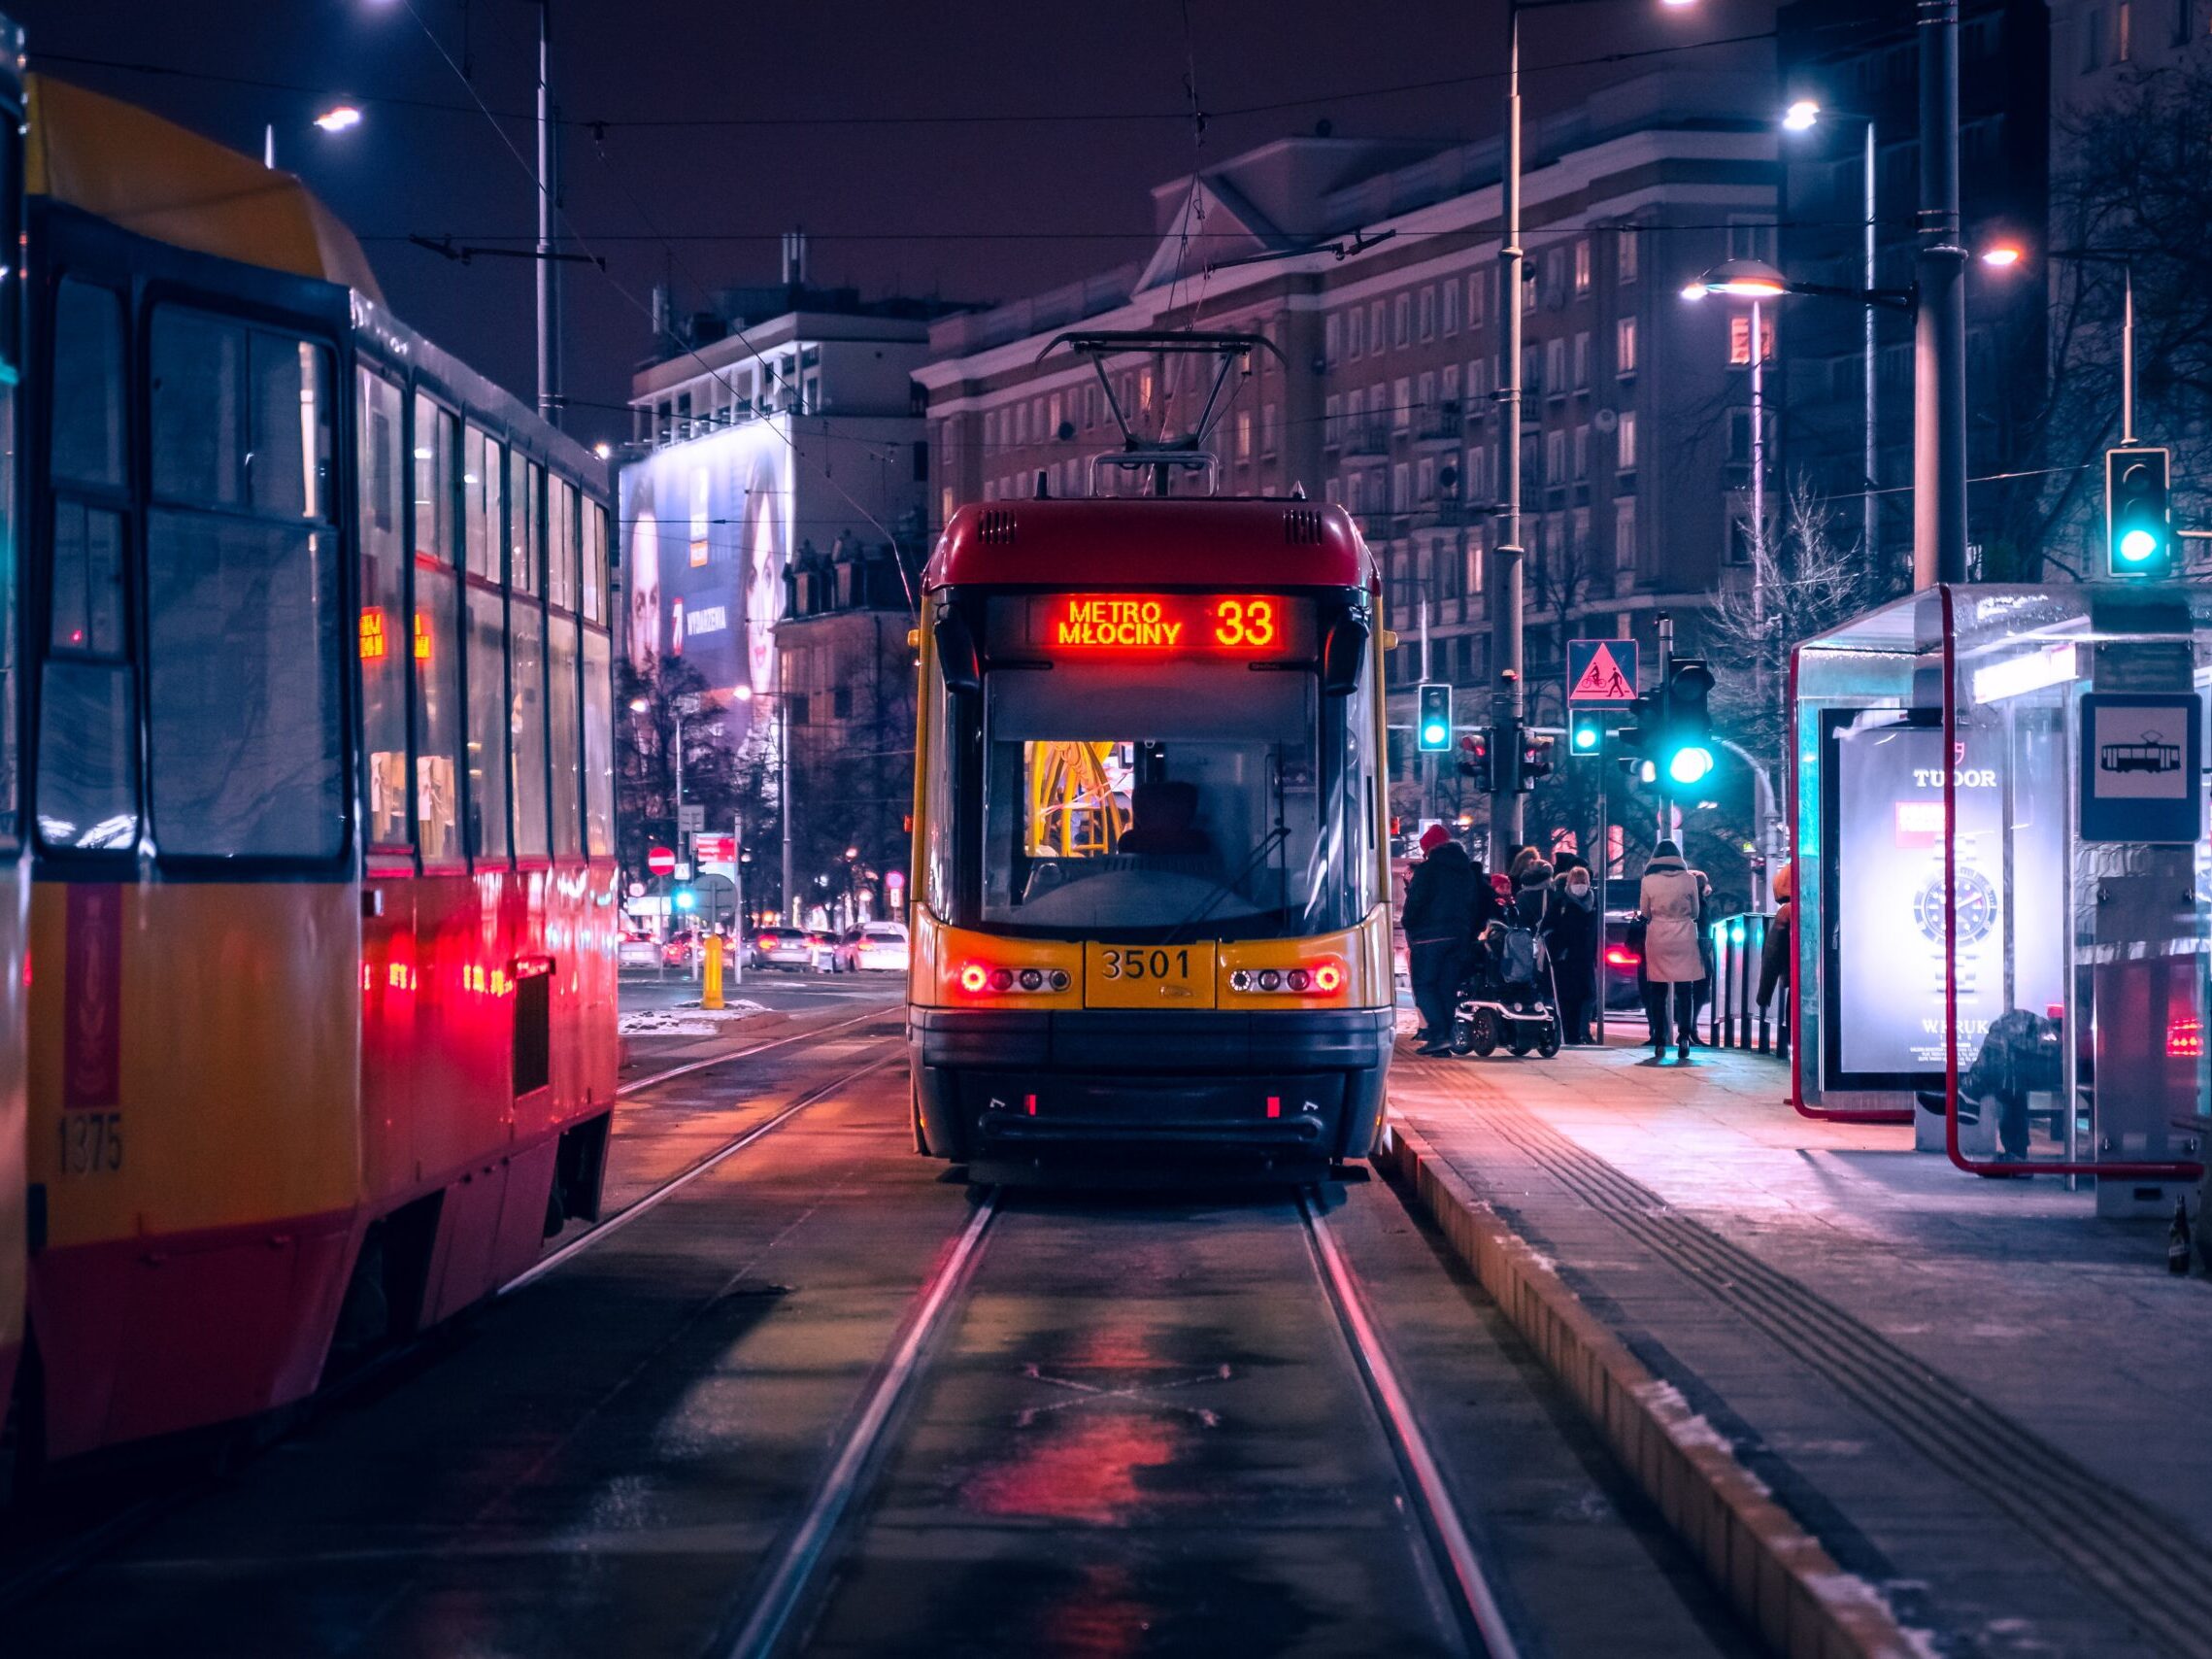 red and black tram on road during night time